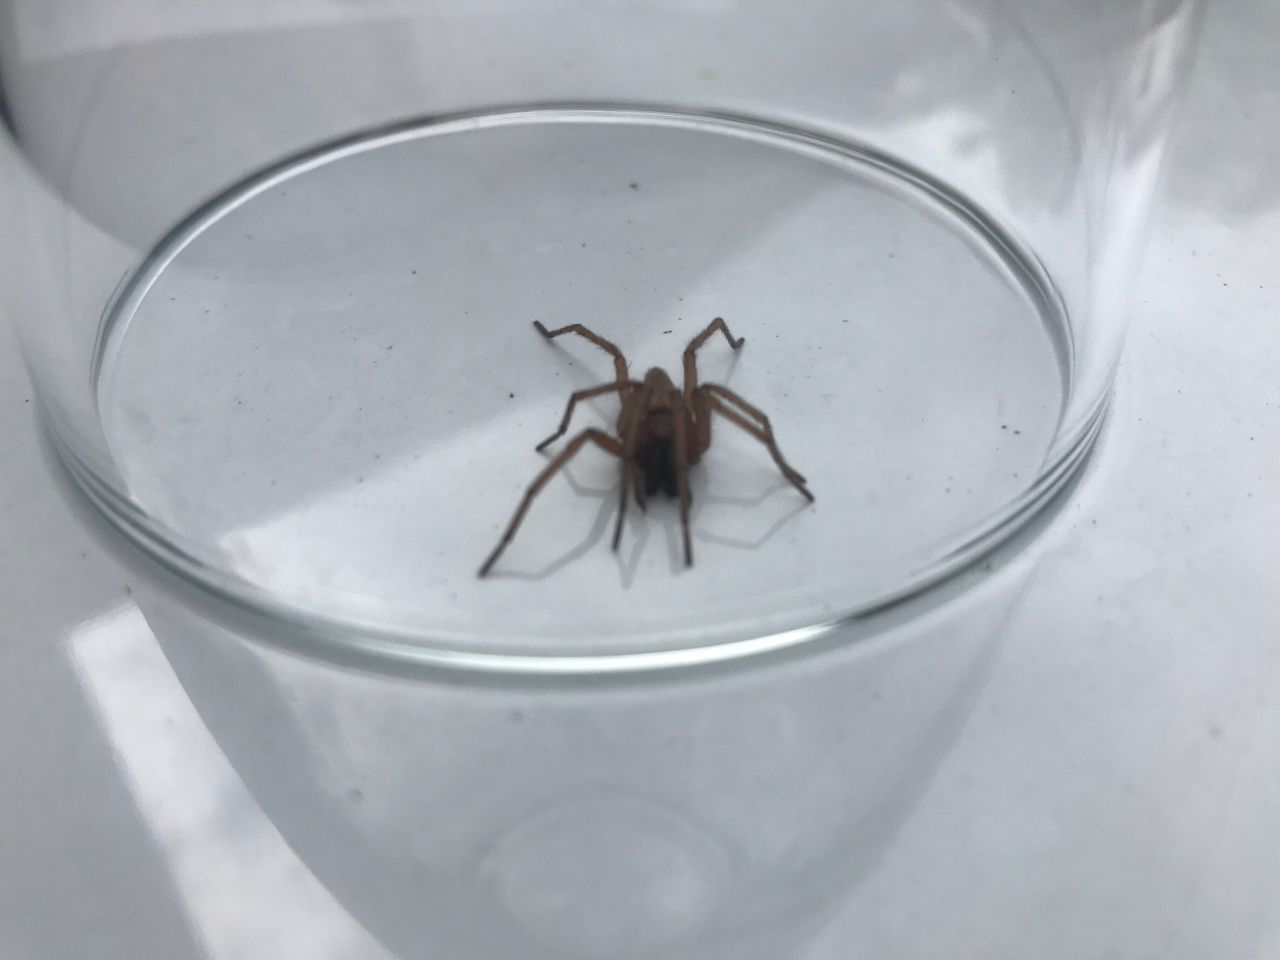 HIGH ANGLE VIEW OF SPIDER ON GLASS IN WATER